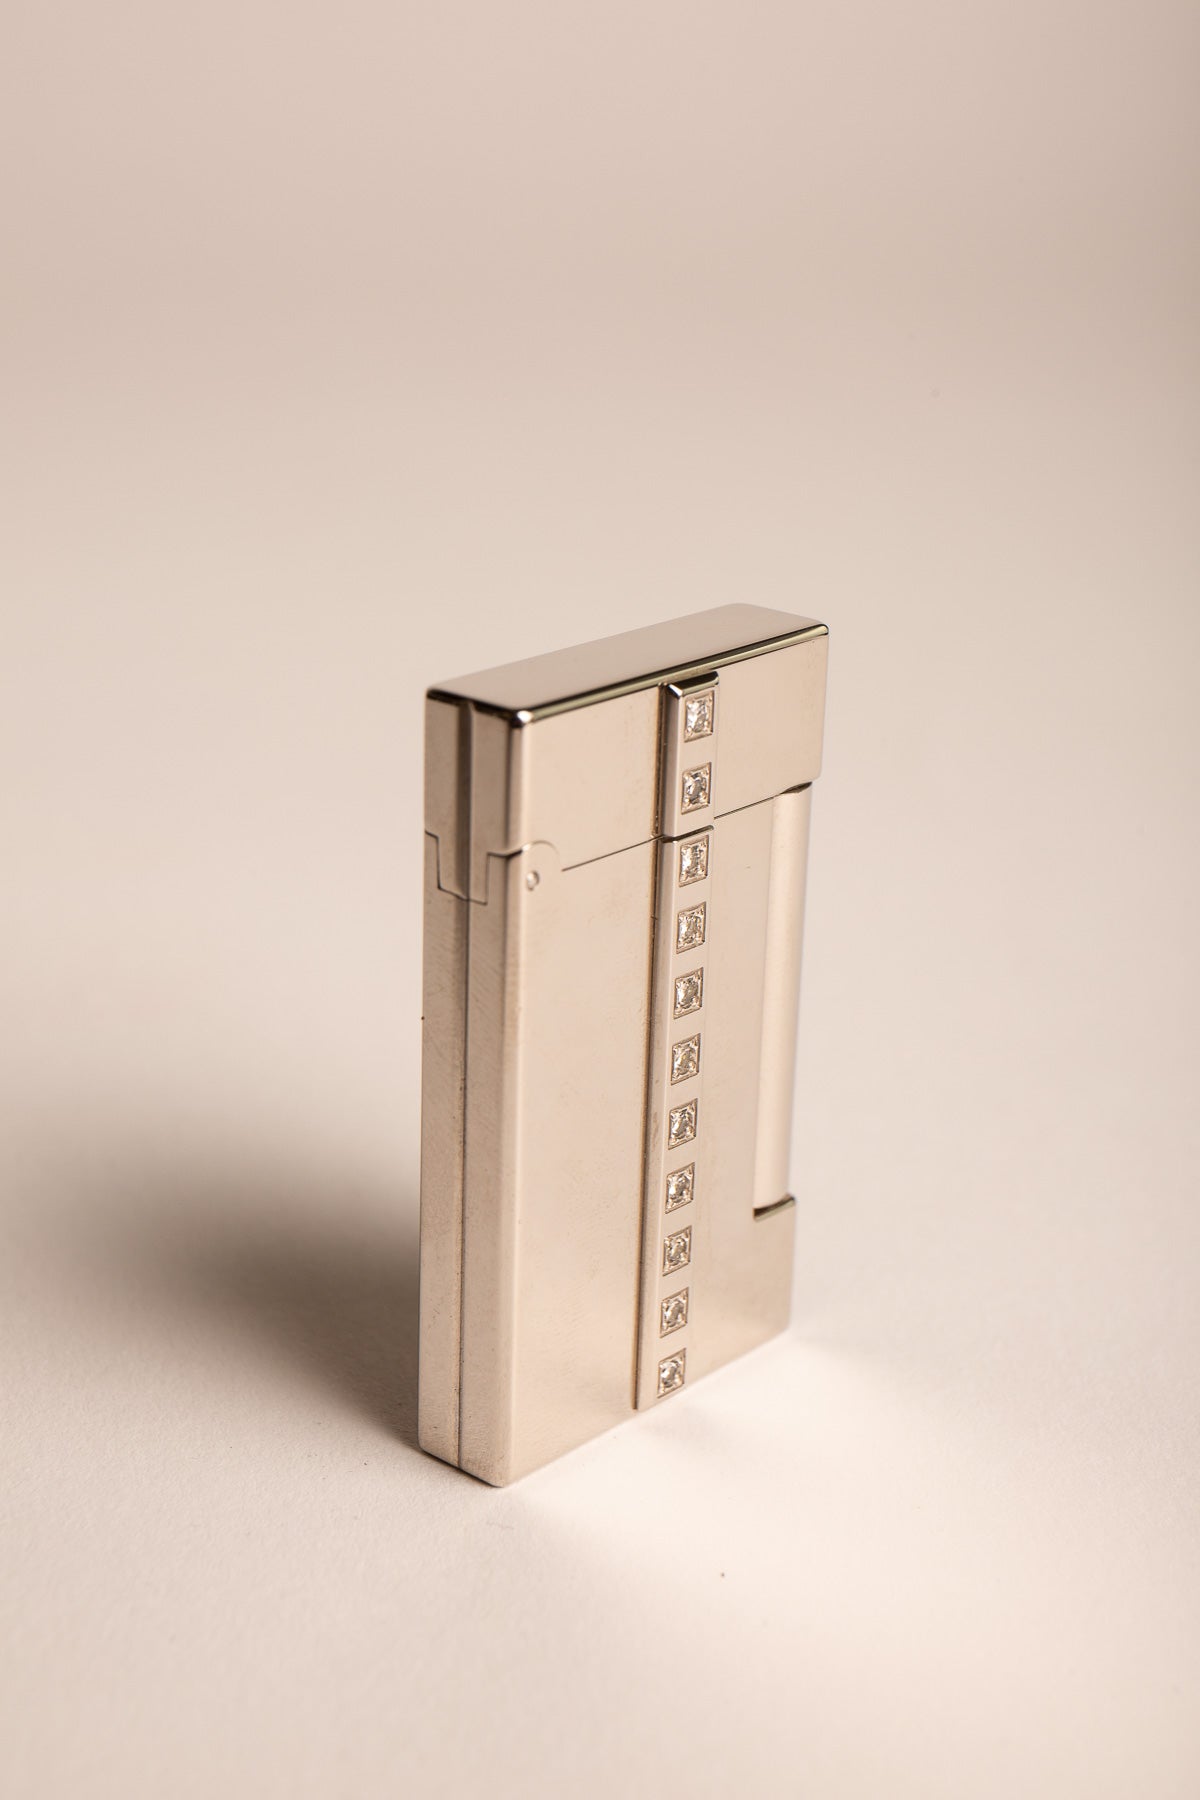 MAXFIELD PRIVATE COLLECTION | DIAMOND DUPONT LIGHTER